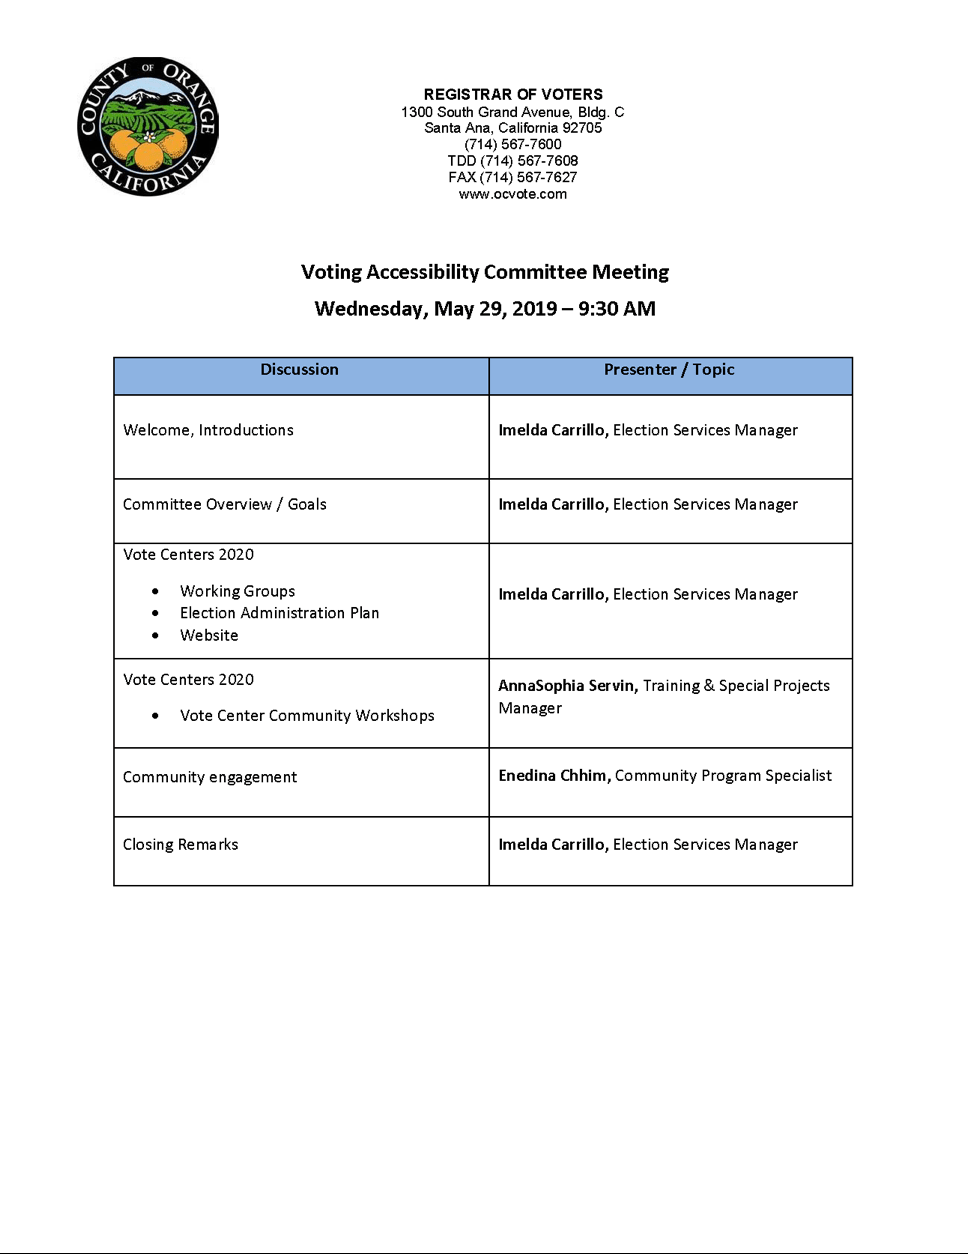 Voting Accessibility Committee Meeting Agenda